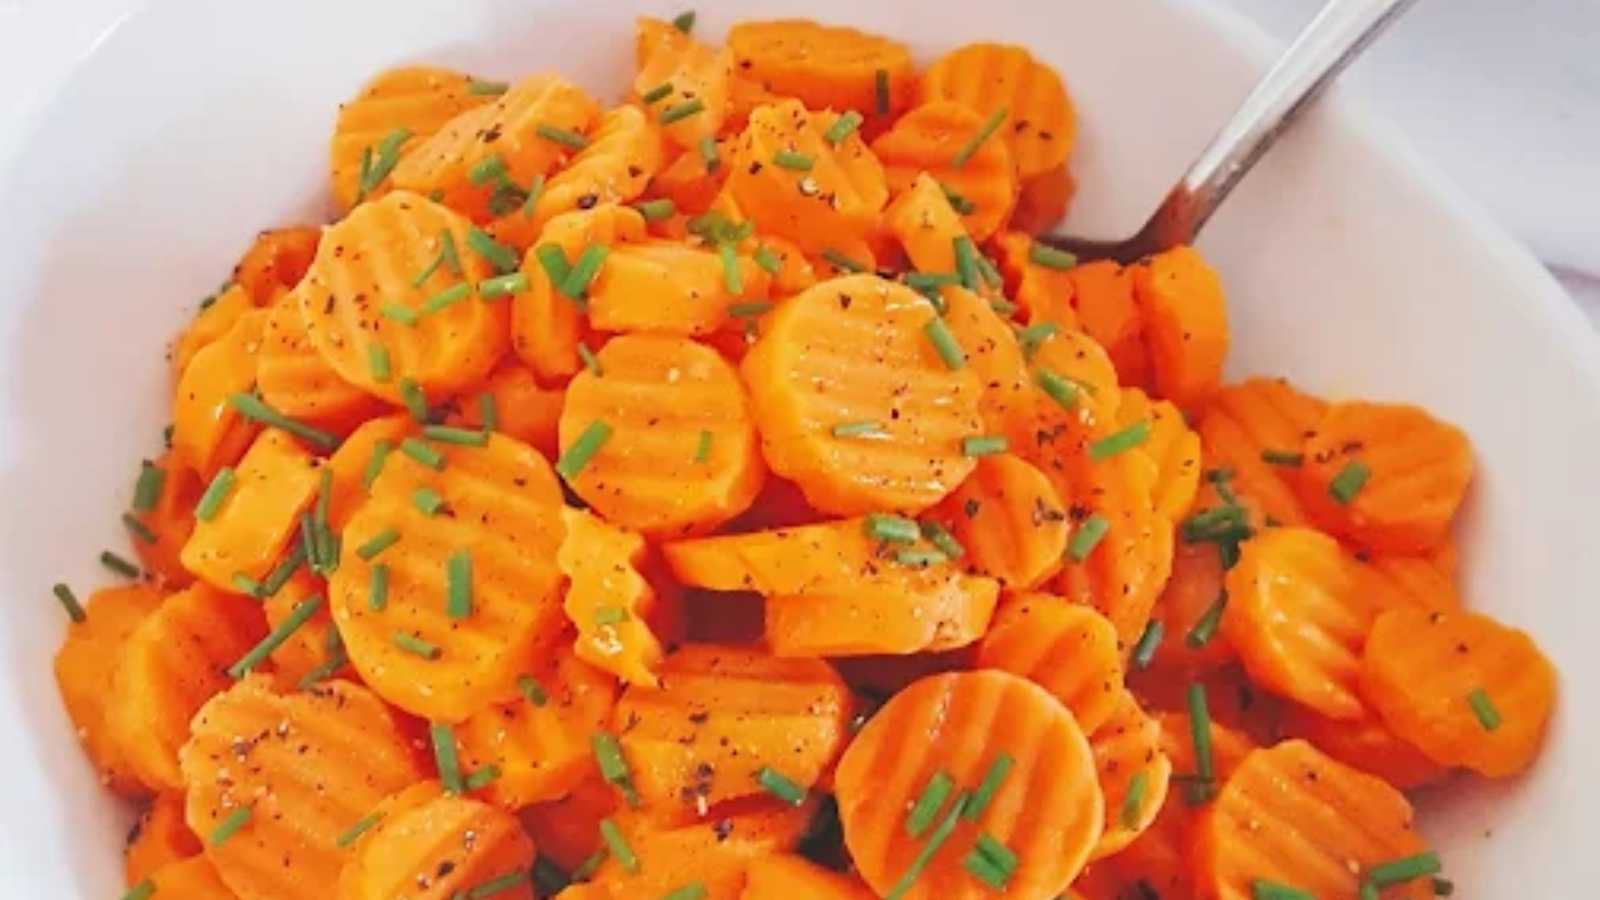 Sliced carrots in a plate.